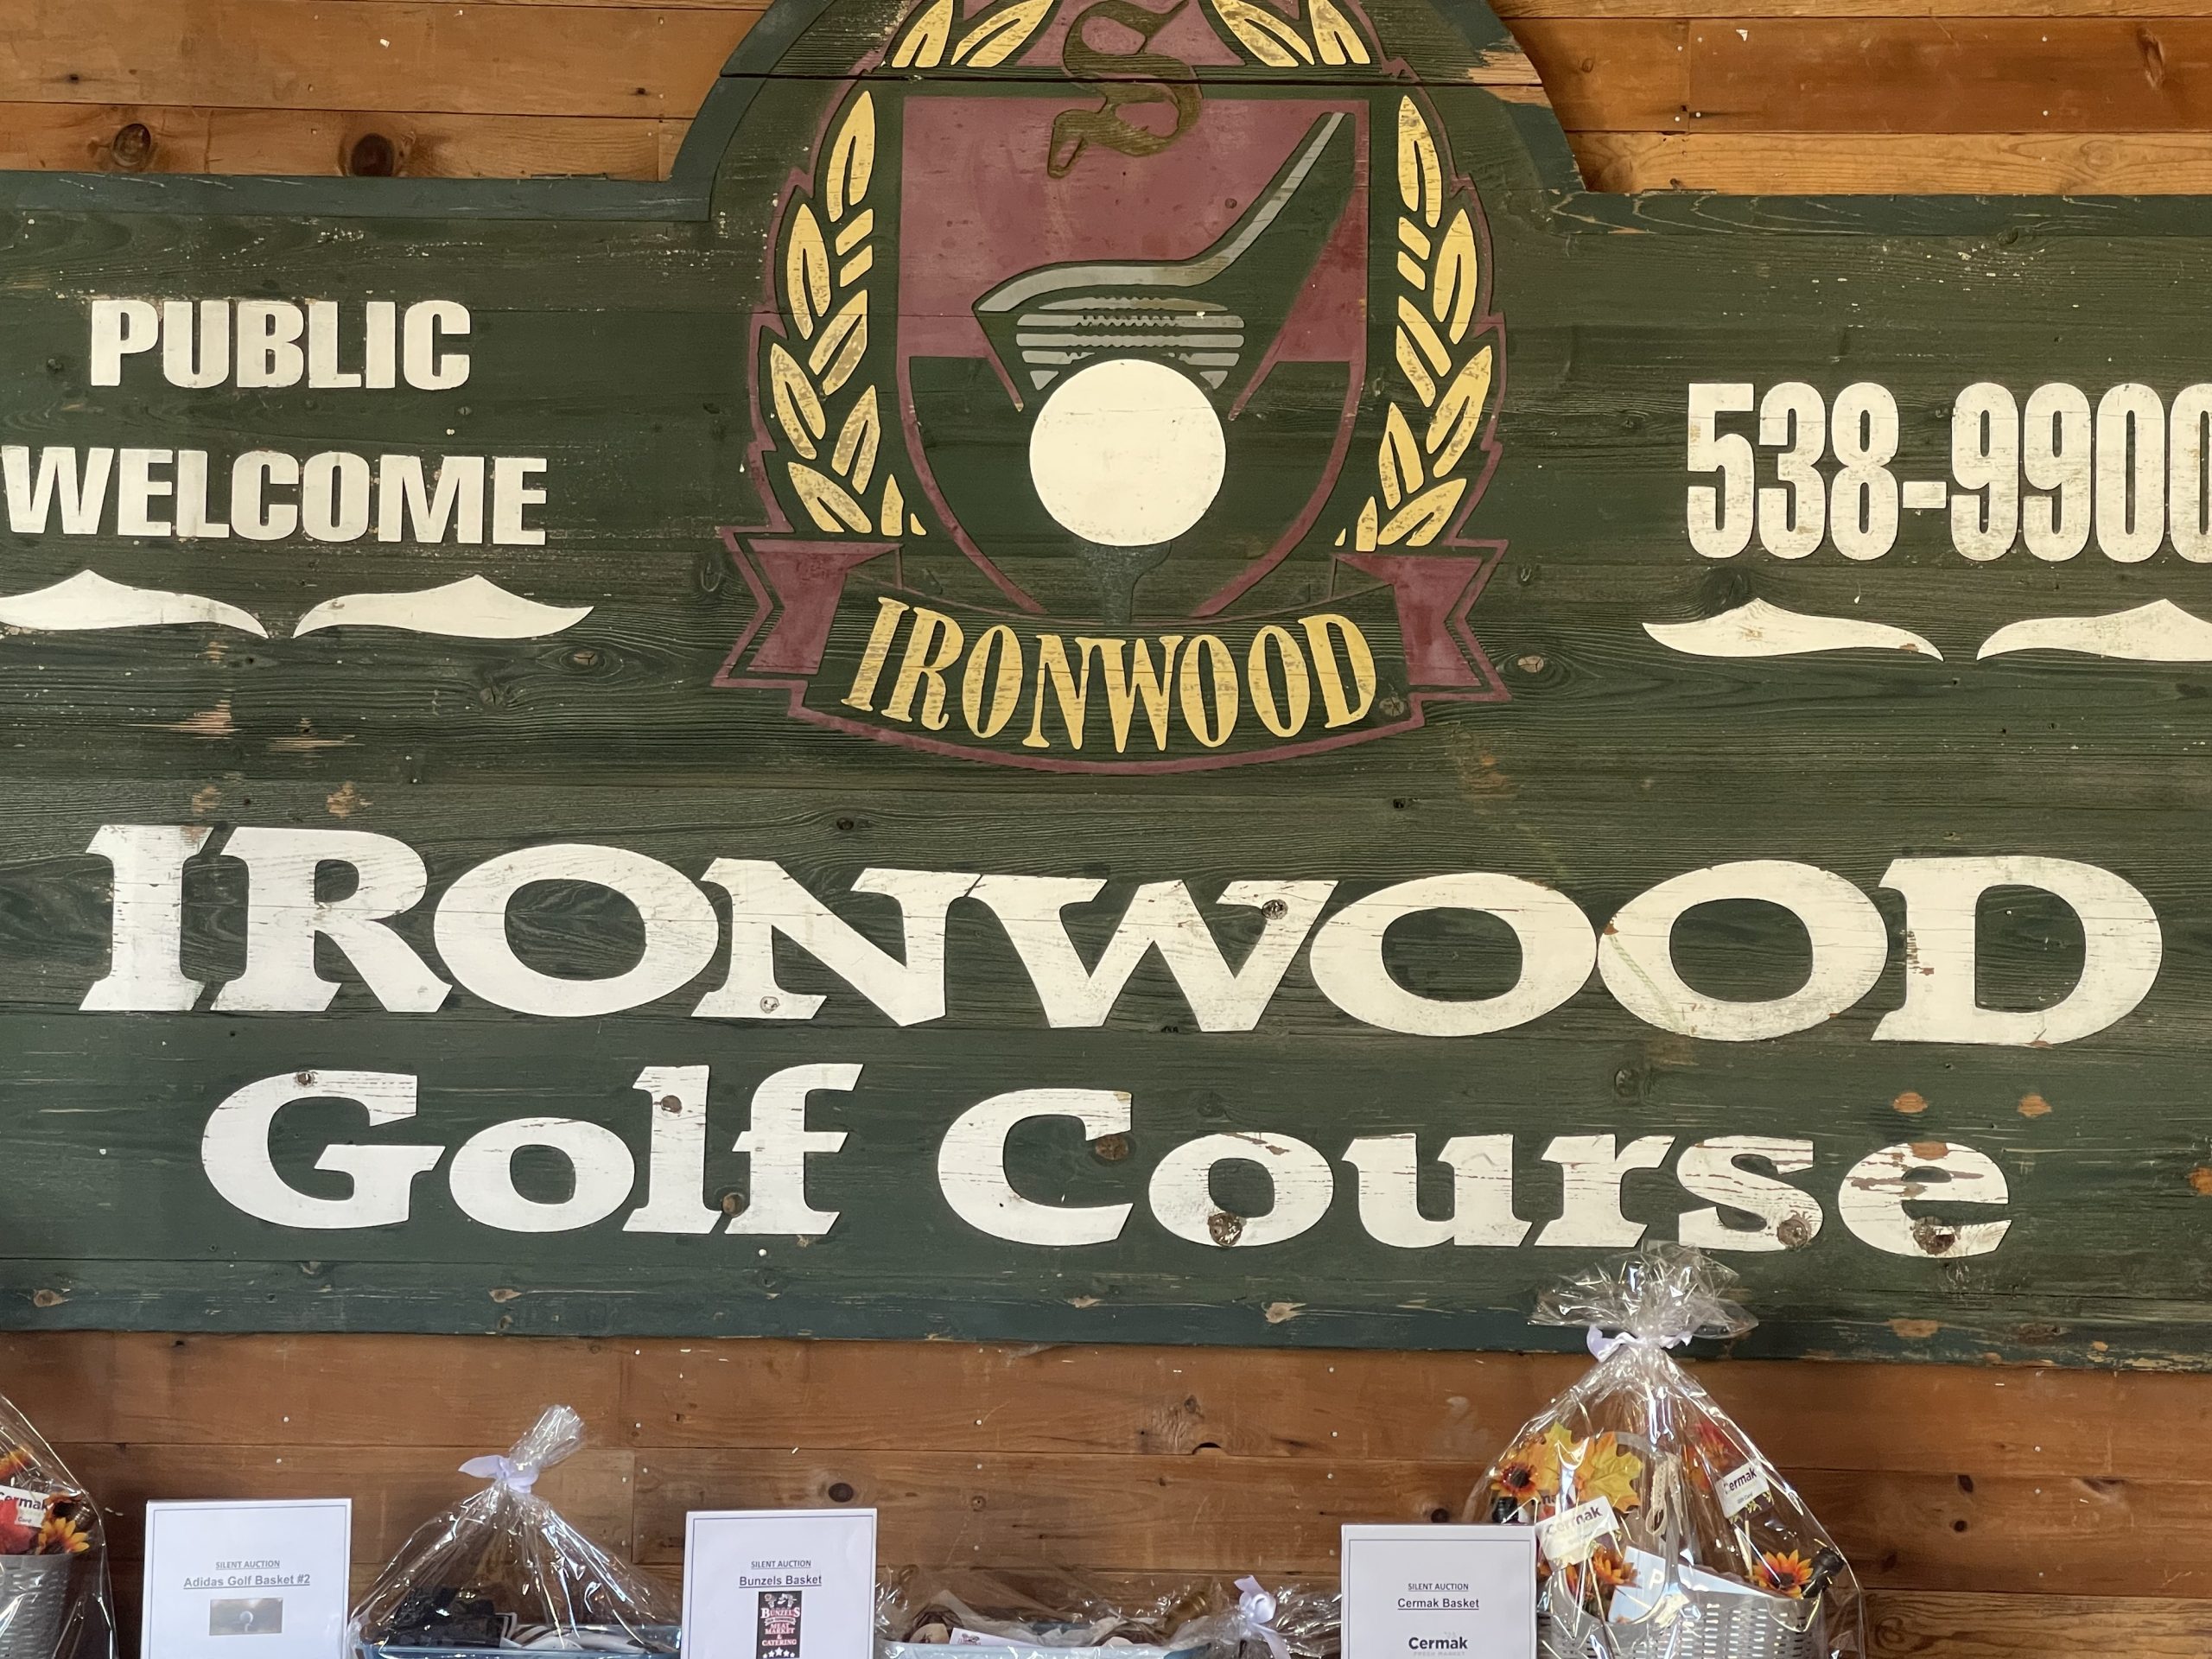 The Gof Course Sign, Ironwood Golf Course